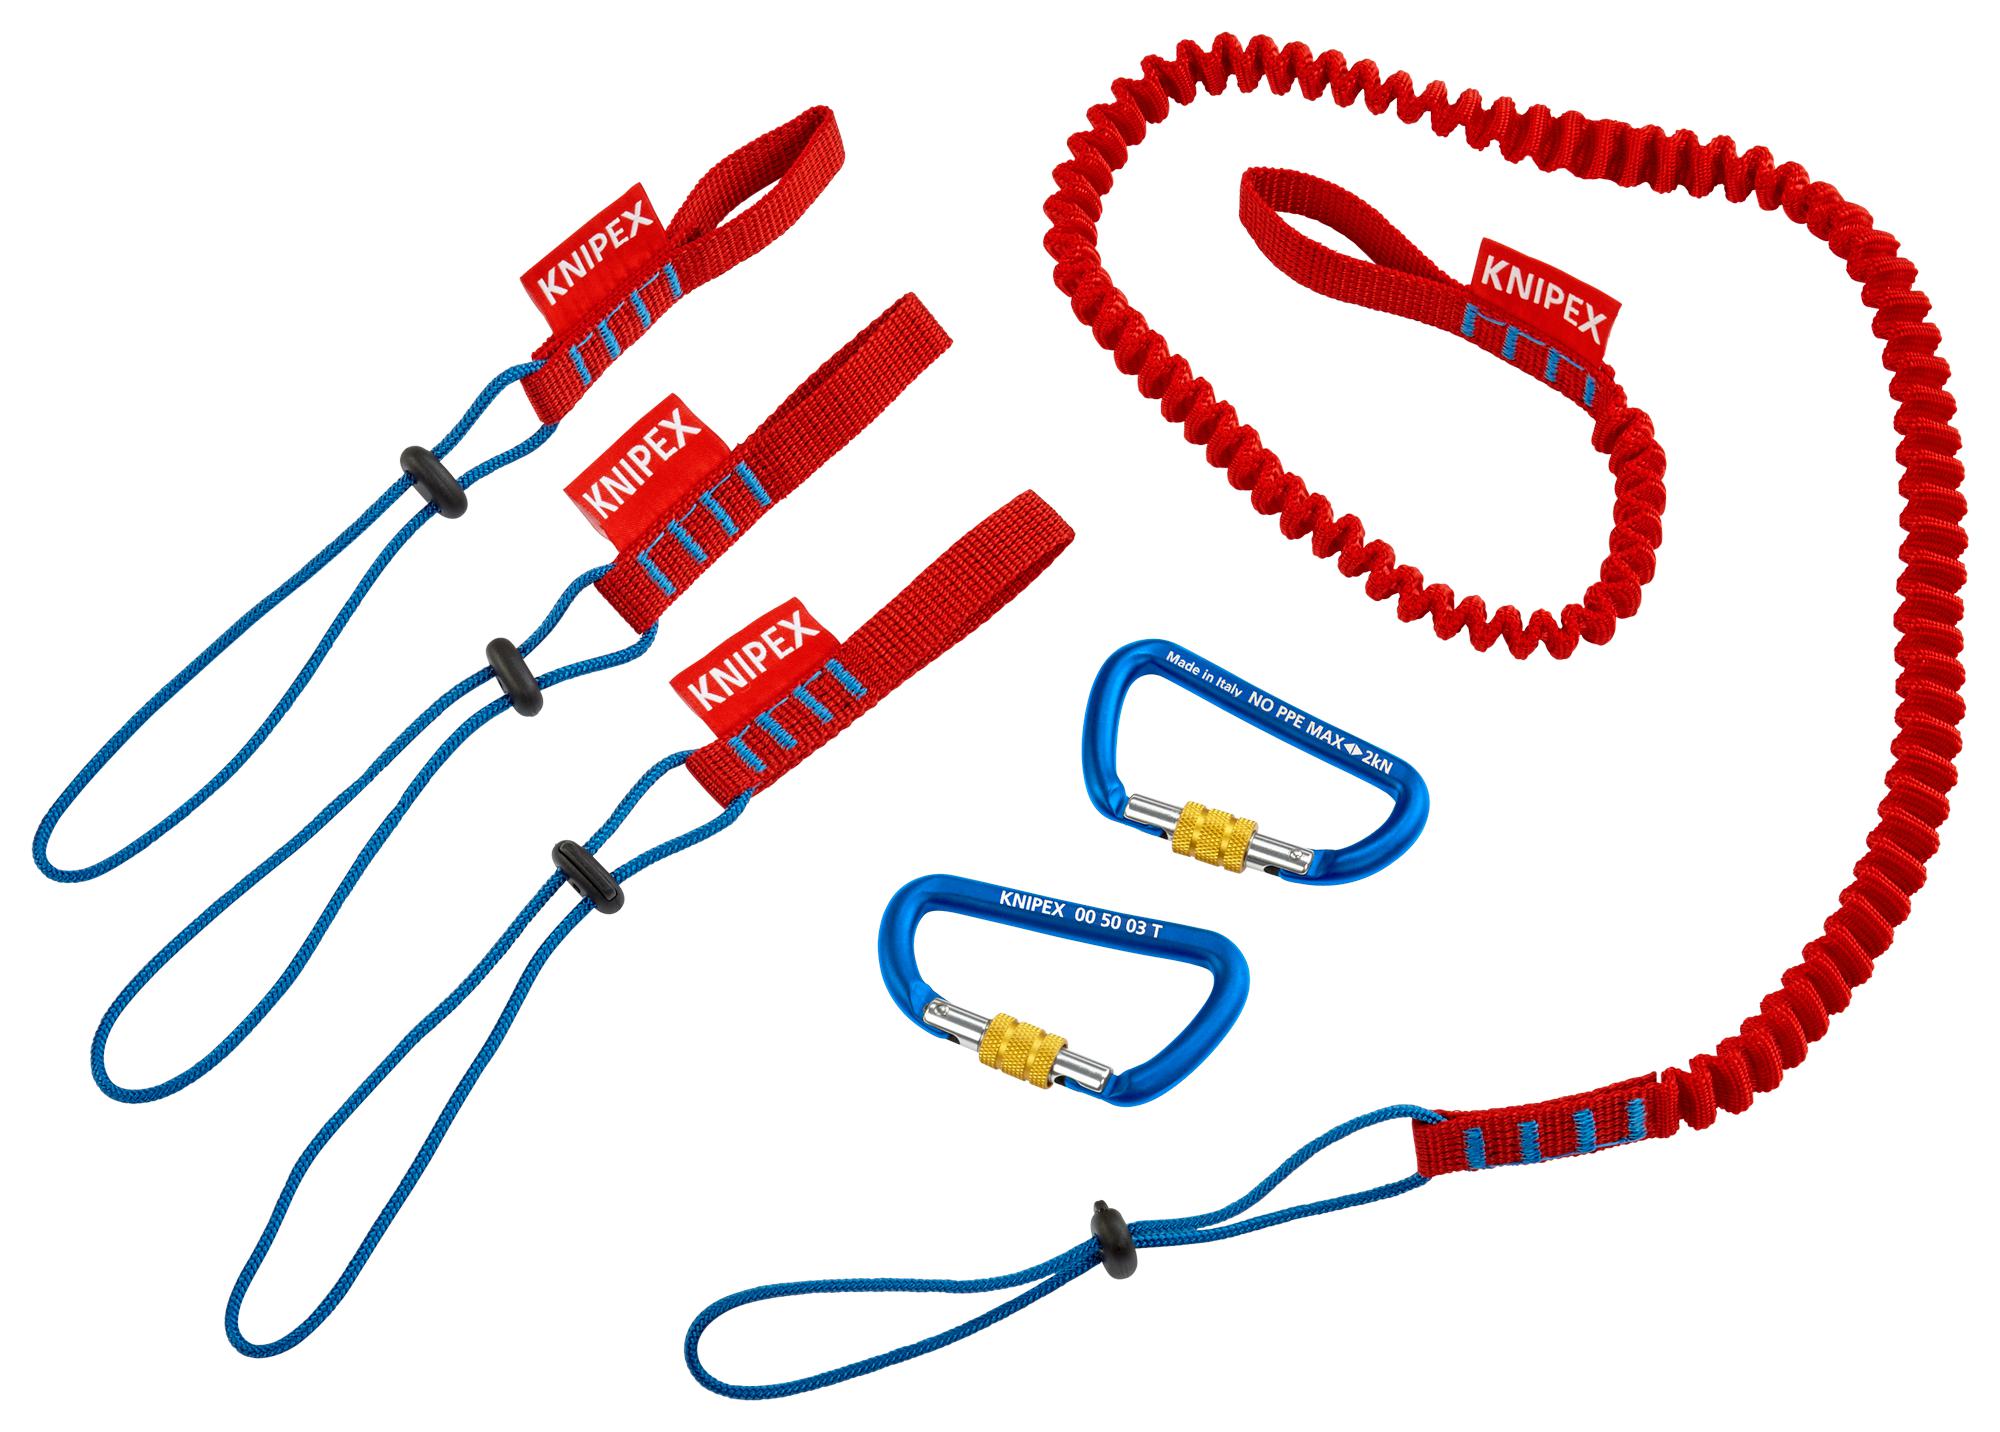 00 50 04 T BK TETHERING SYSTEM SET, 6PC KNIPEX